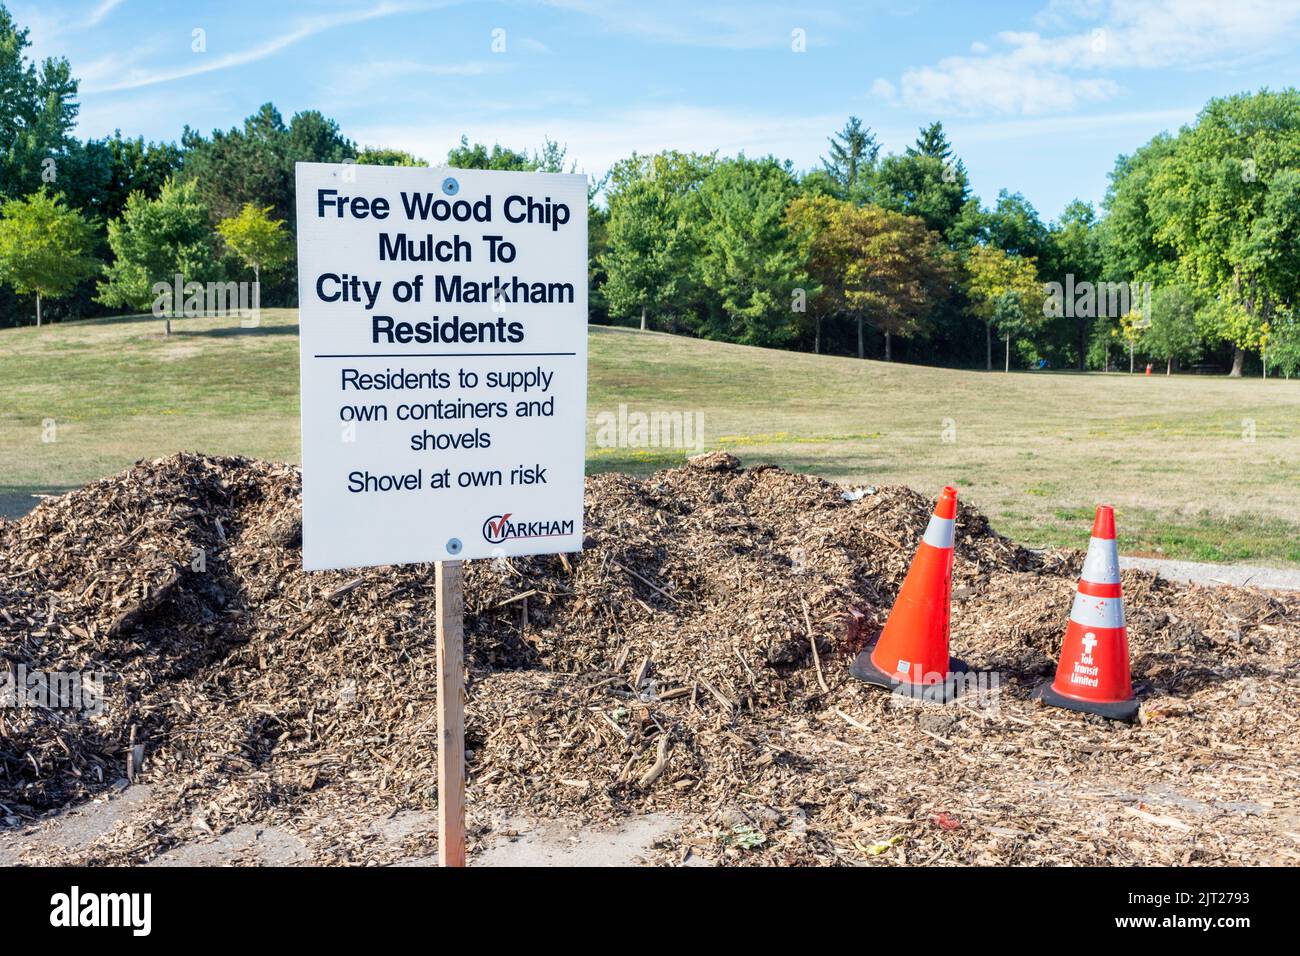 Sign of wood chip mulch offered to residents in Markham, Ontario, Canada Stock Photo